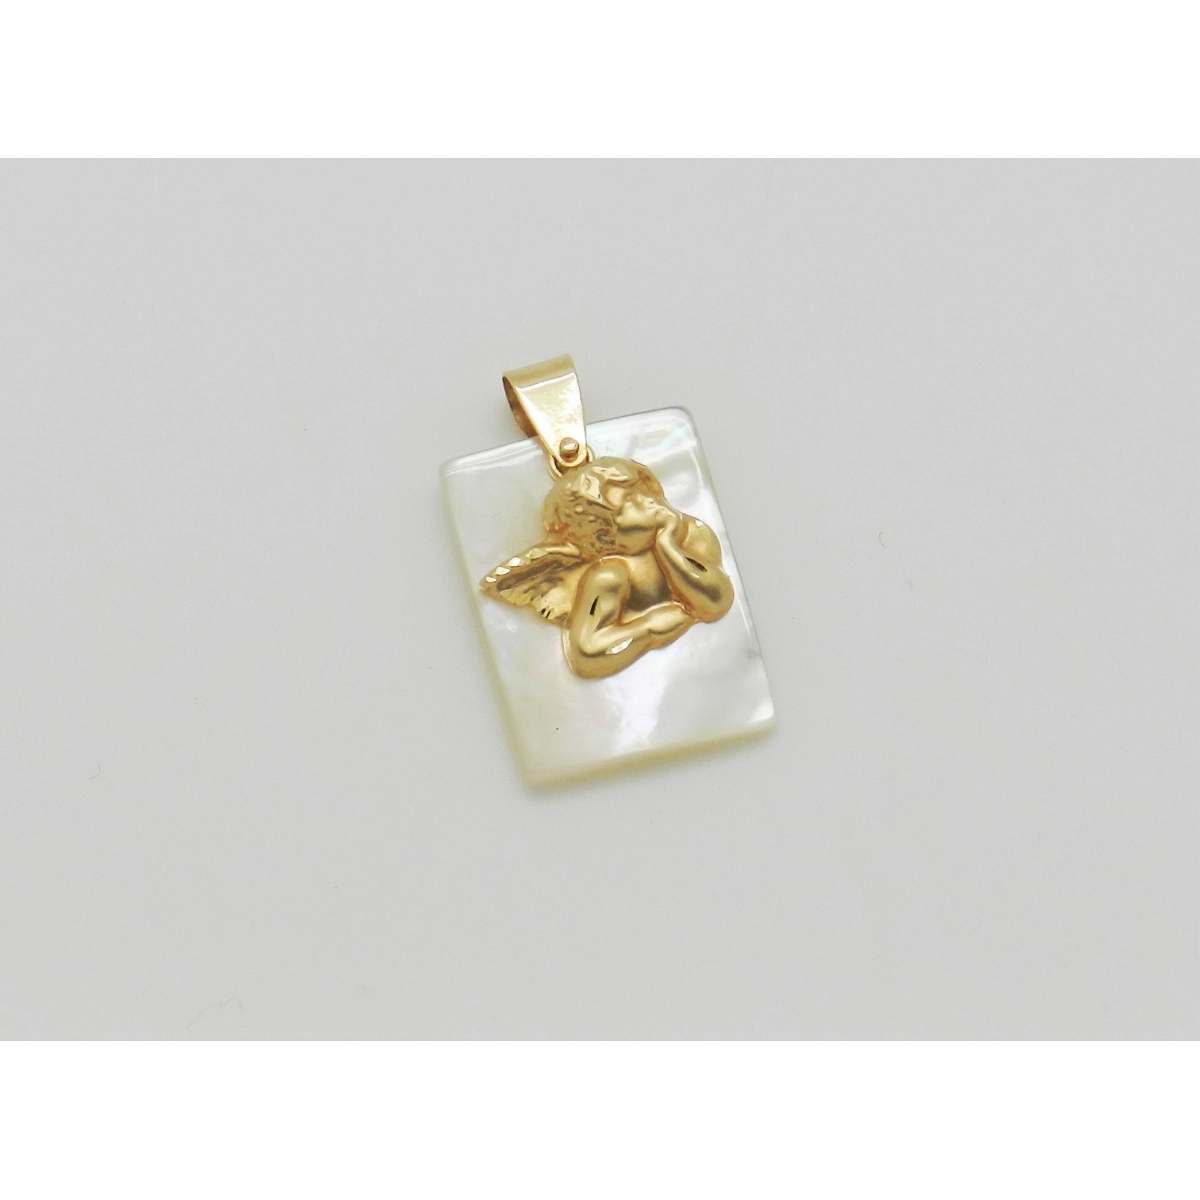 PENDANT GOLD ANGEL OF THE KEEPS WITH MOTHER OF PEARL